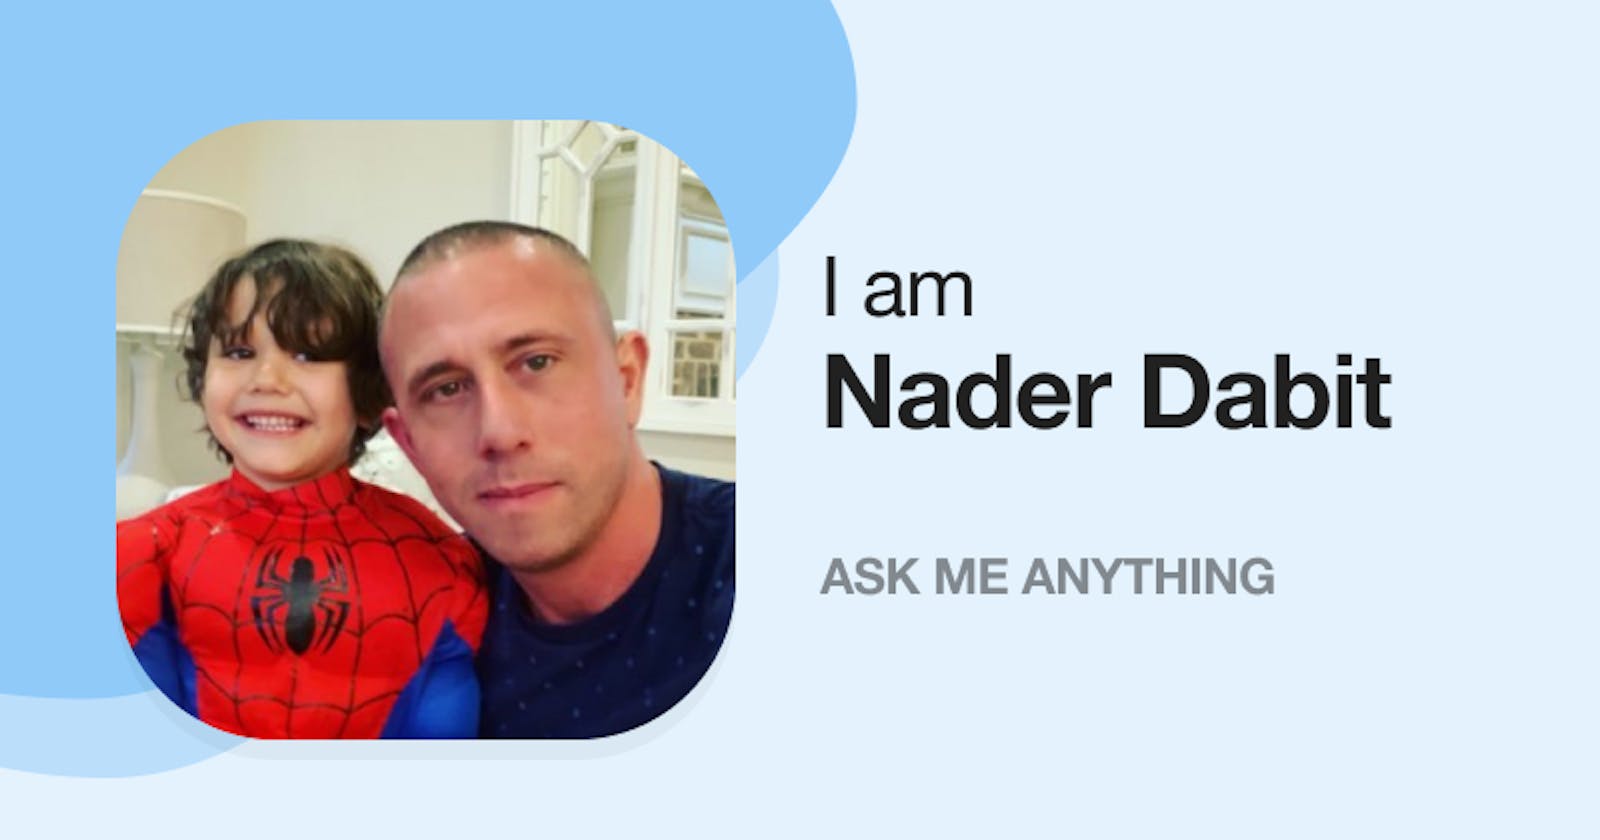 I'm Nader Dabit. I am a web and mobile developer, author, and speaker. Ask me anything!